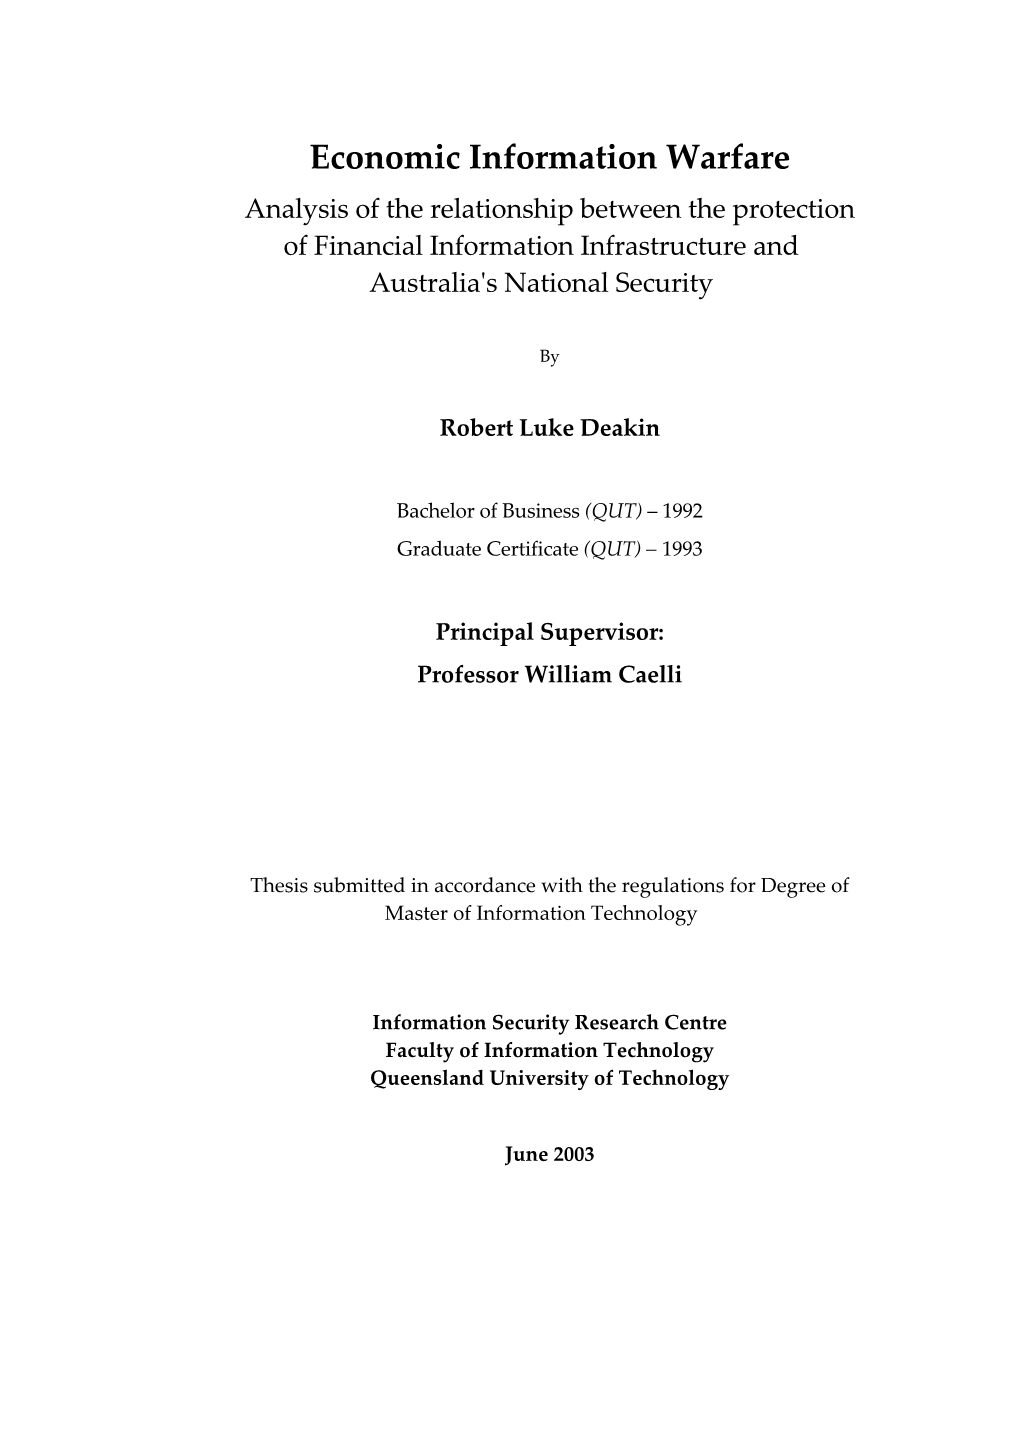 Economic Information Warfare Analysis of the Relationship Between the Protection of Financial Information Infrastructure and Australiaʹs National Security